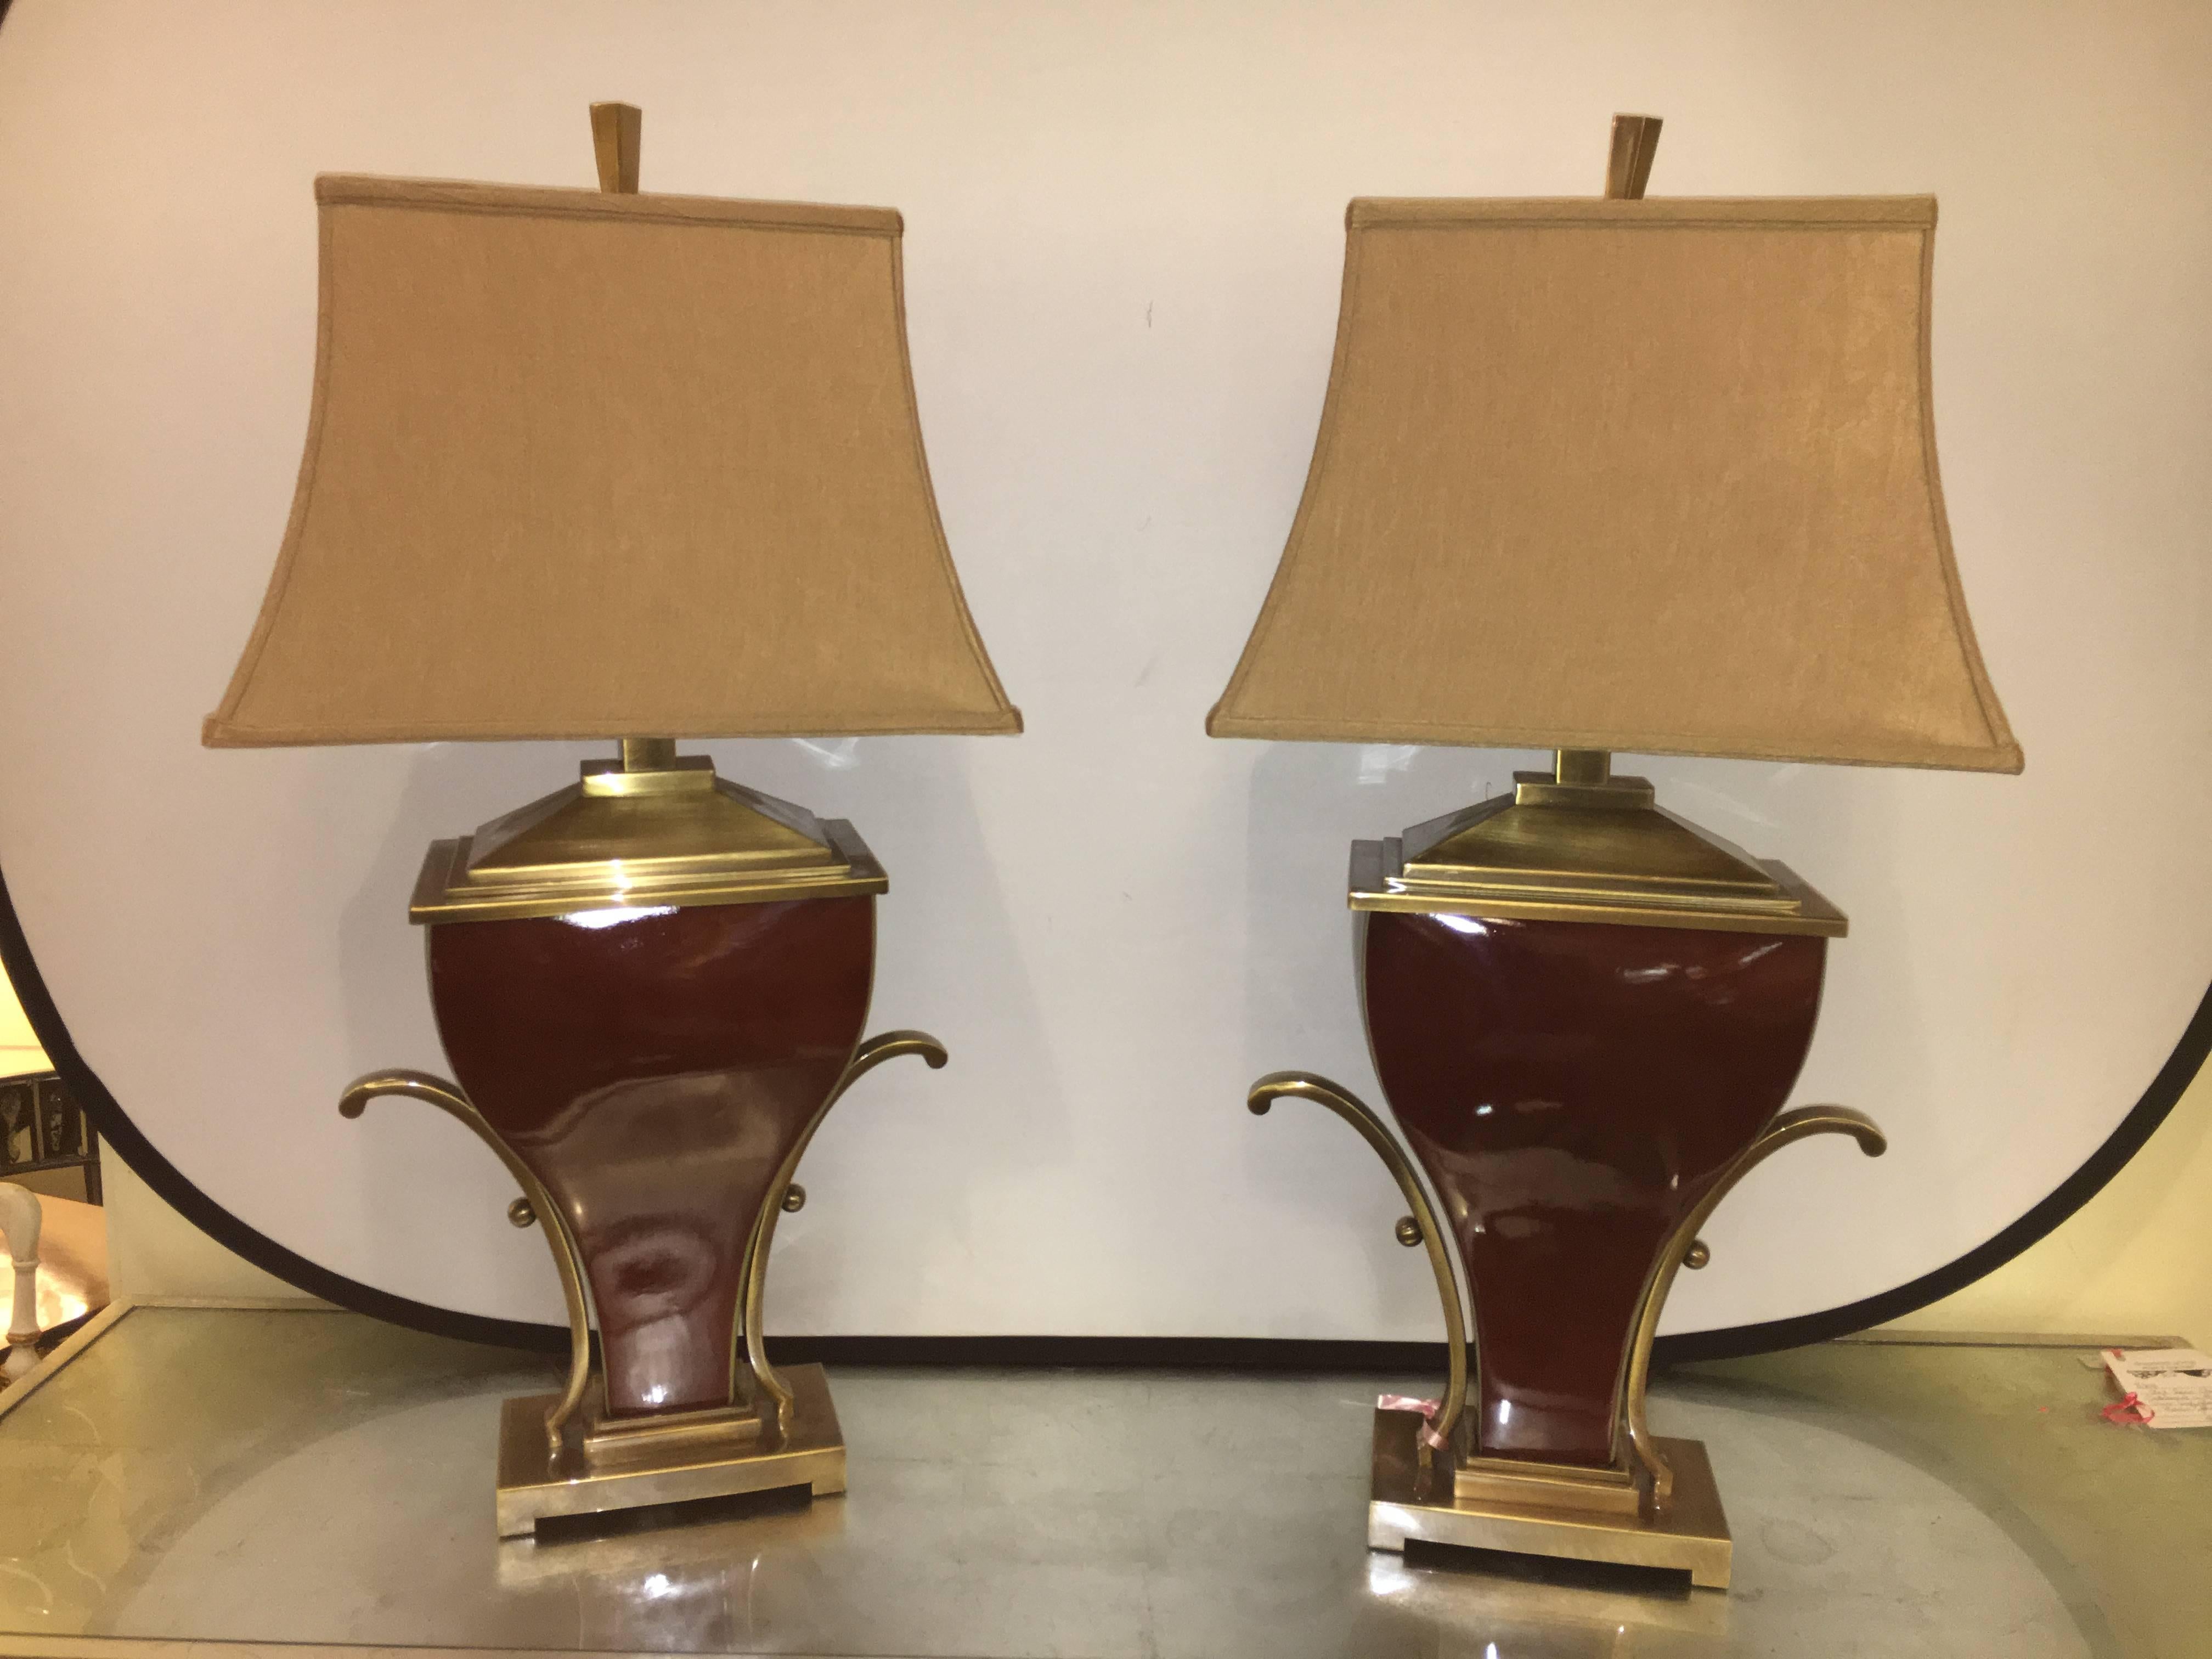 Pair of Art Deco style brass-mounted porcelain table lamps. An extremely decorative pair of urn form table lamps with brass mounts. Each lamp complete with brass finial and custom quality shades. The Burgundy Urn form centres having flowing arms